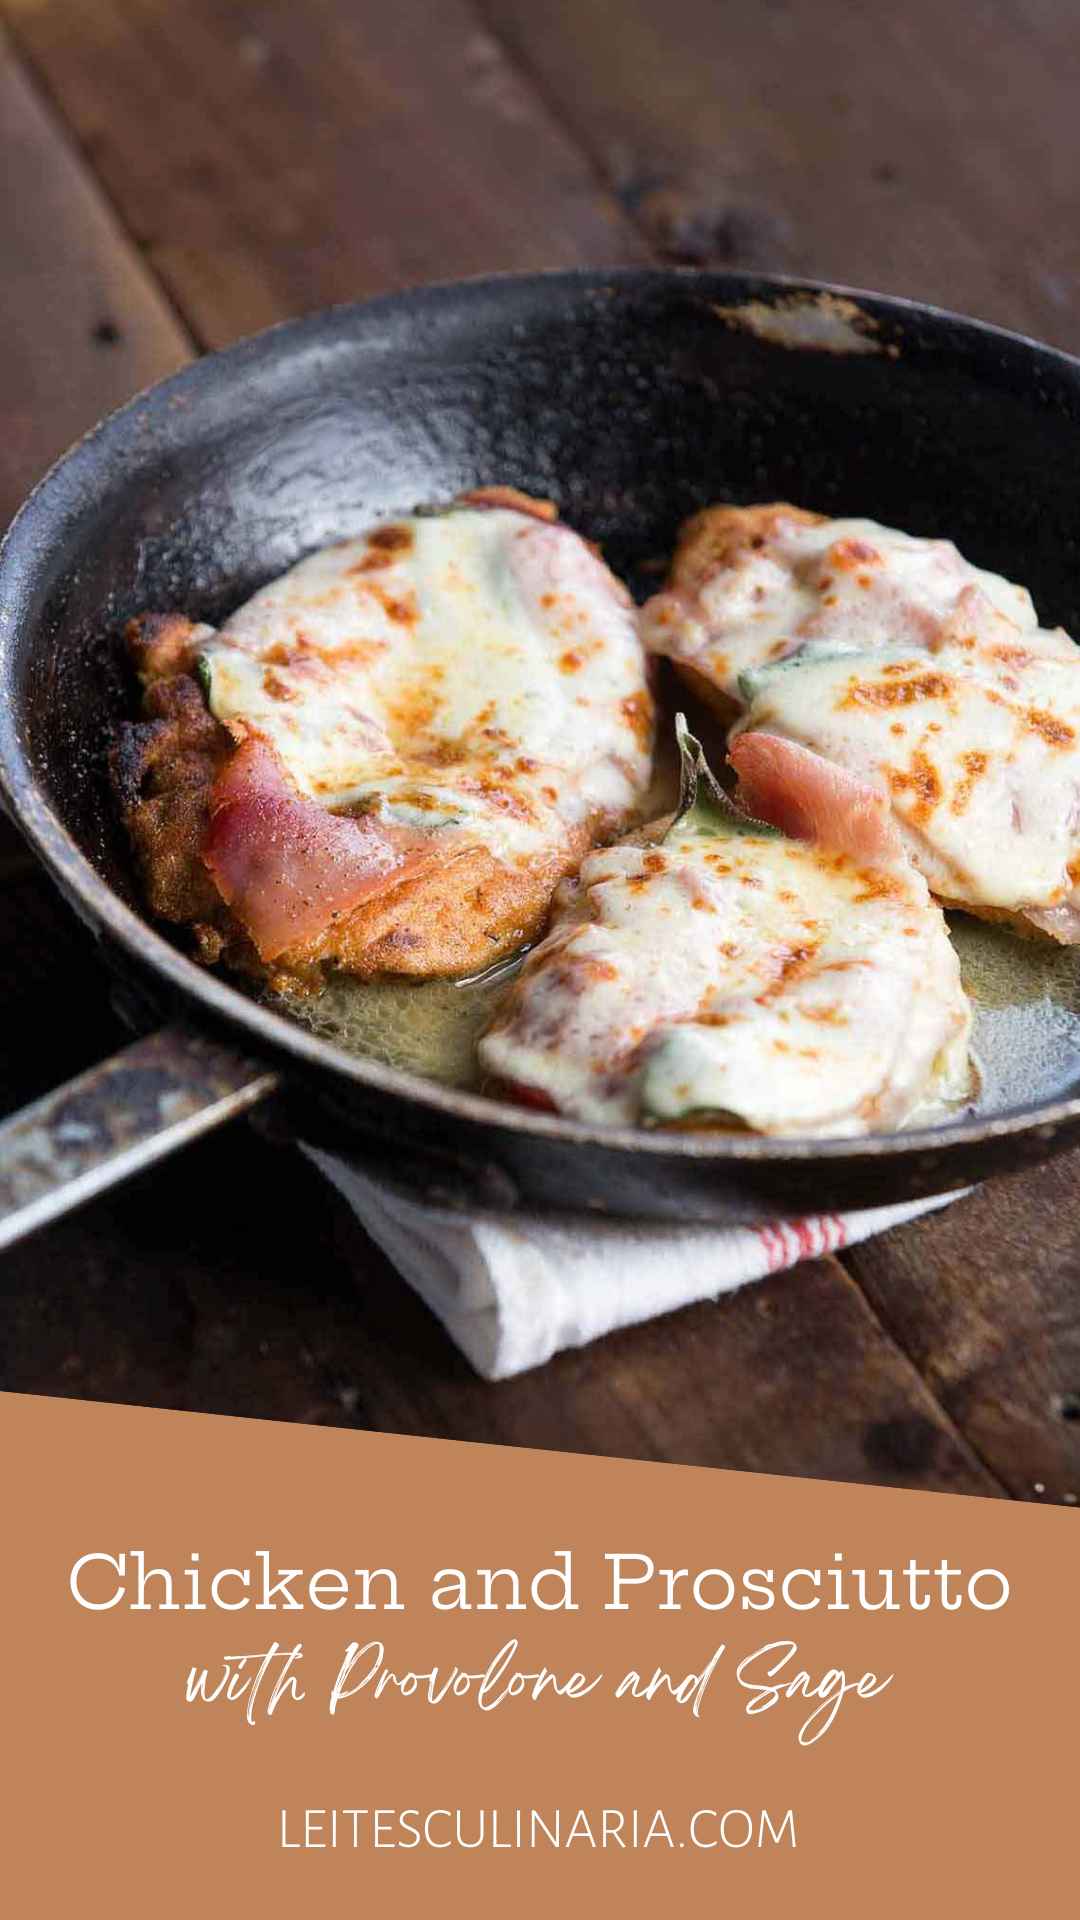 Three chicken cutlets wrapped in prosciutto and covered in cheese in a skillet.